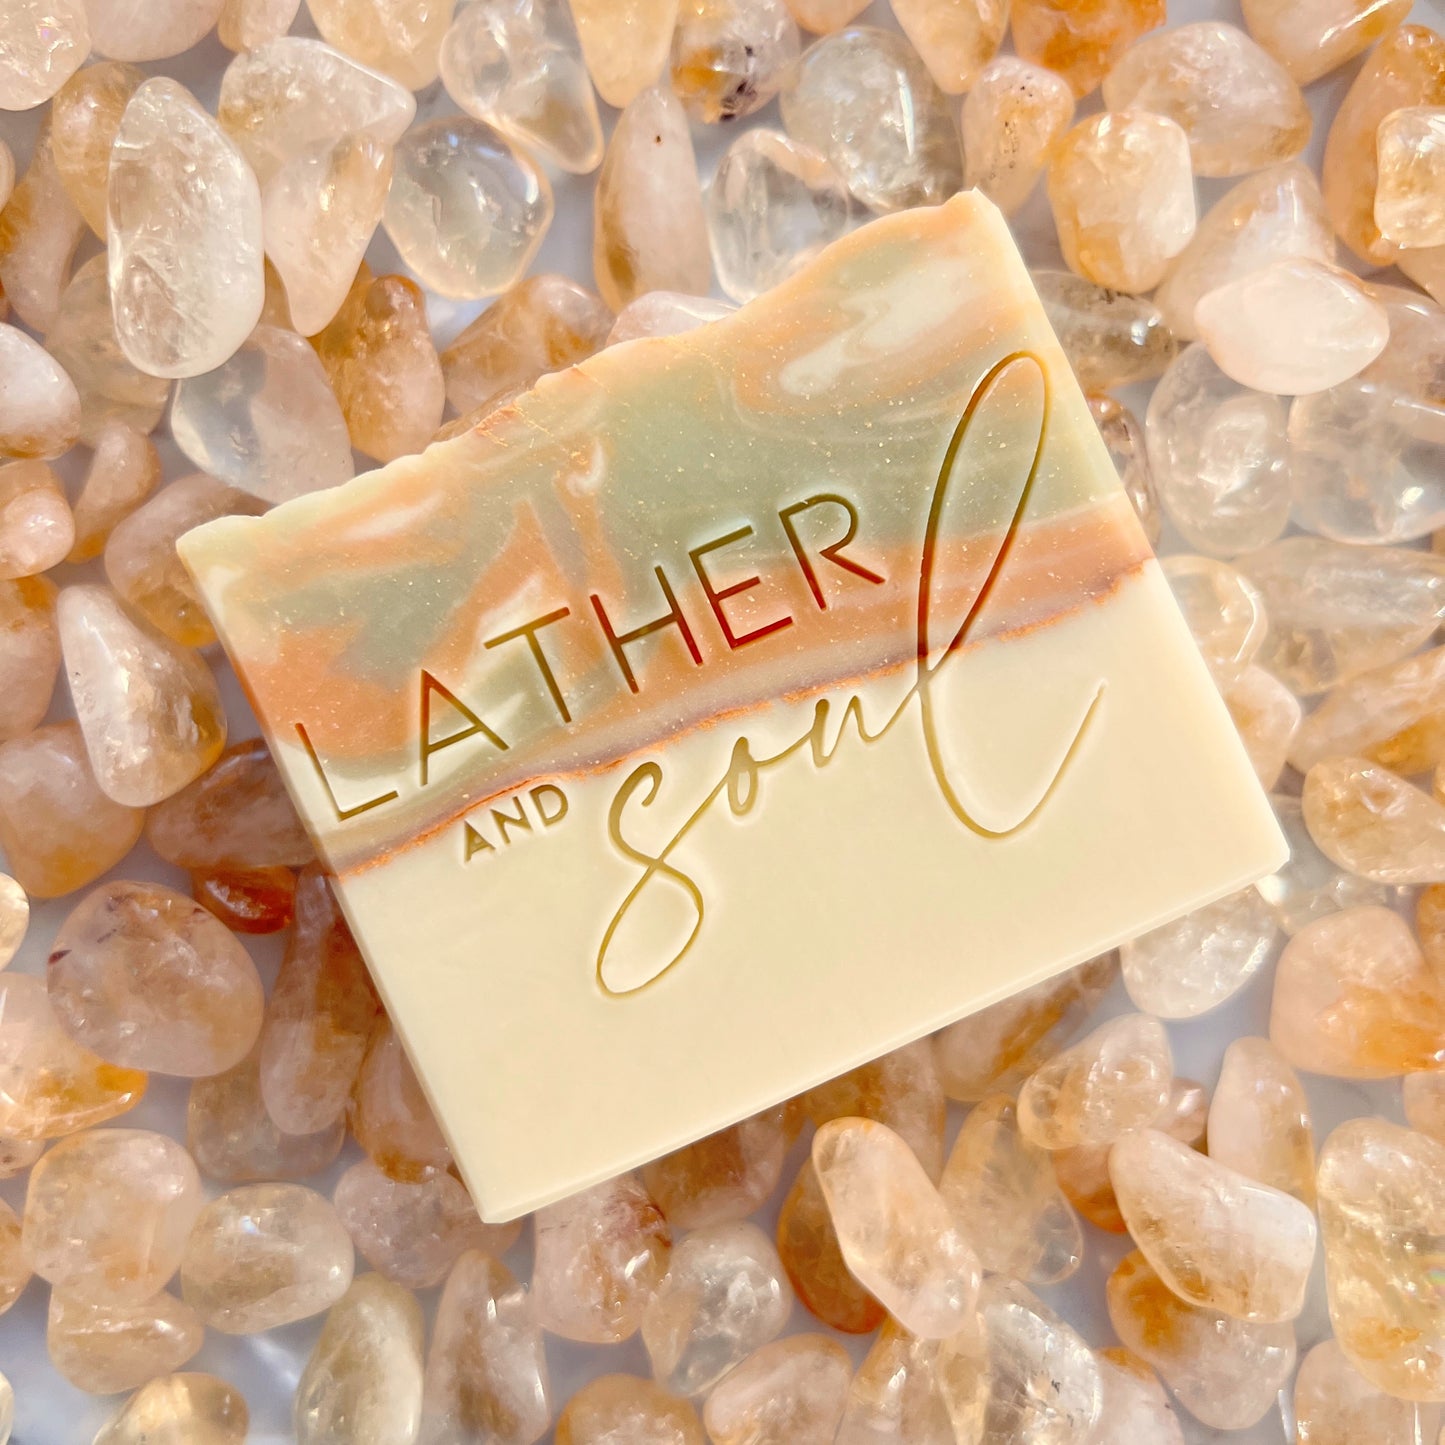 Citrine crystal soap by Lather and Soul Skincare